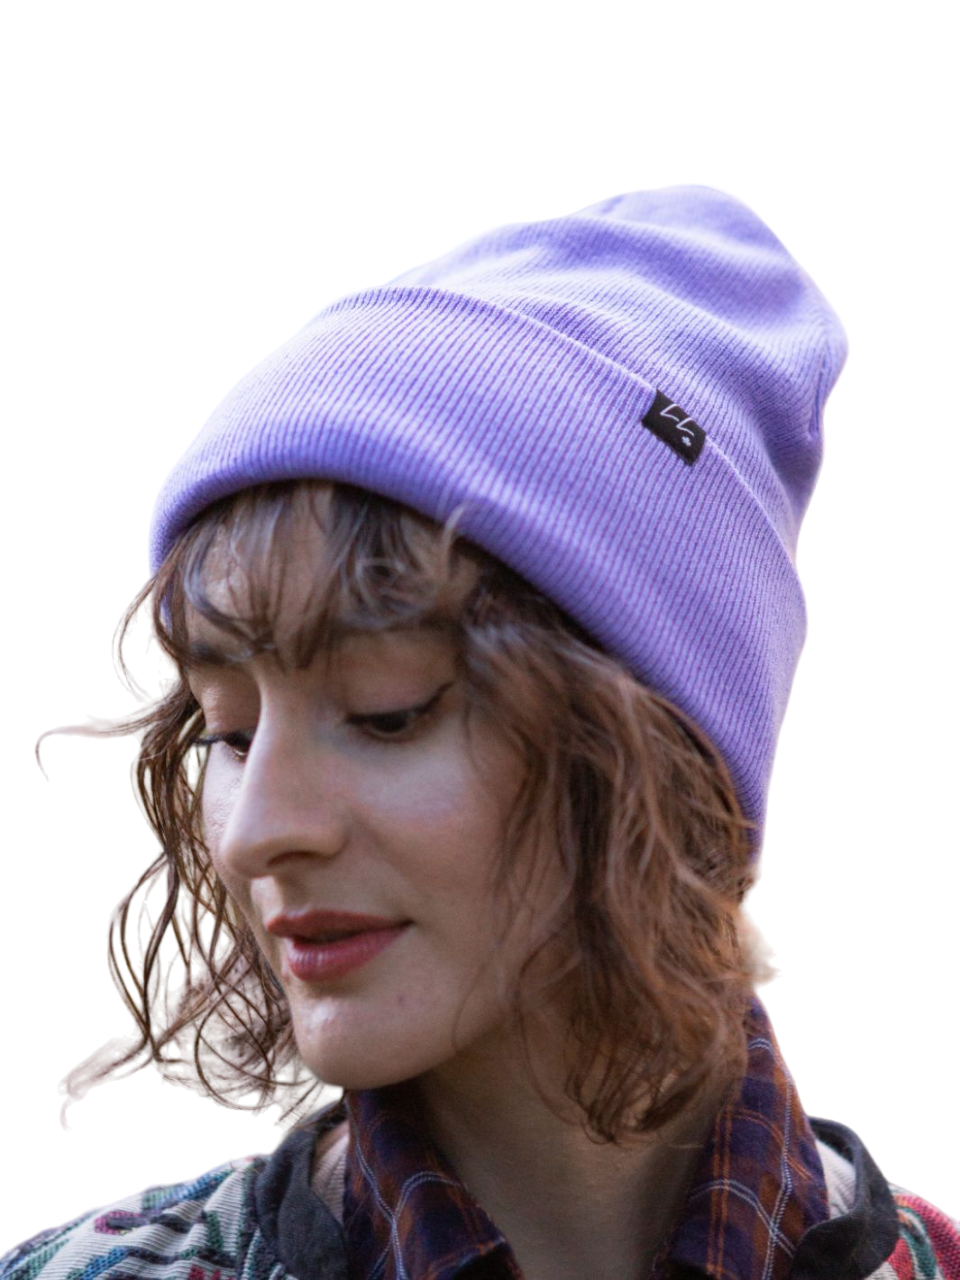 Individual wearing their Made in Canada Local Laundry Giving toque in purple. Every purchase of these toques goes towards giving toques to those in need